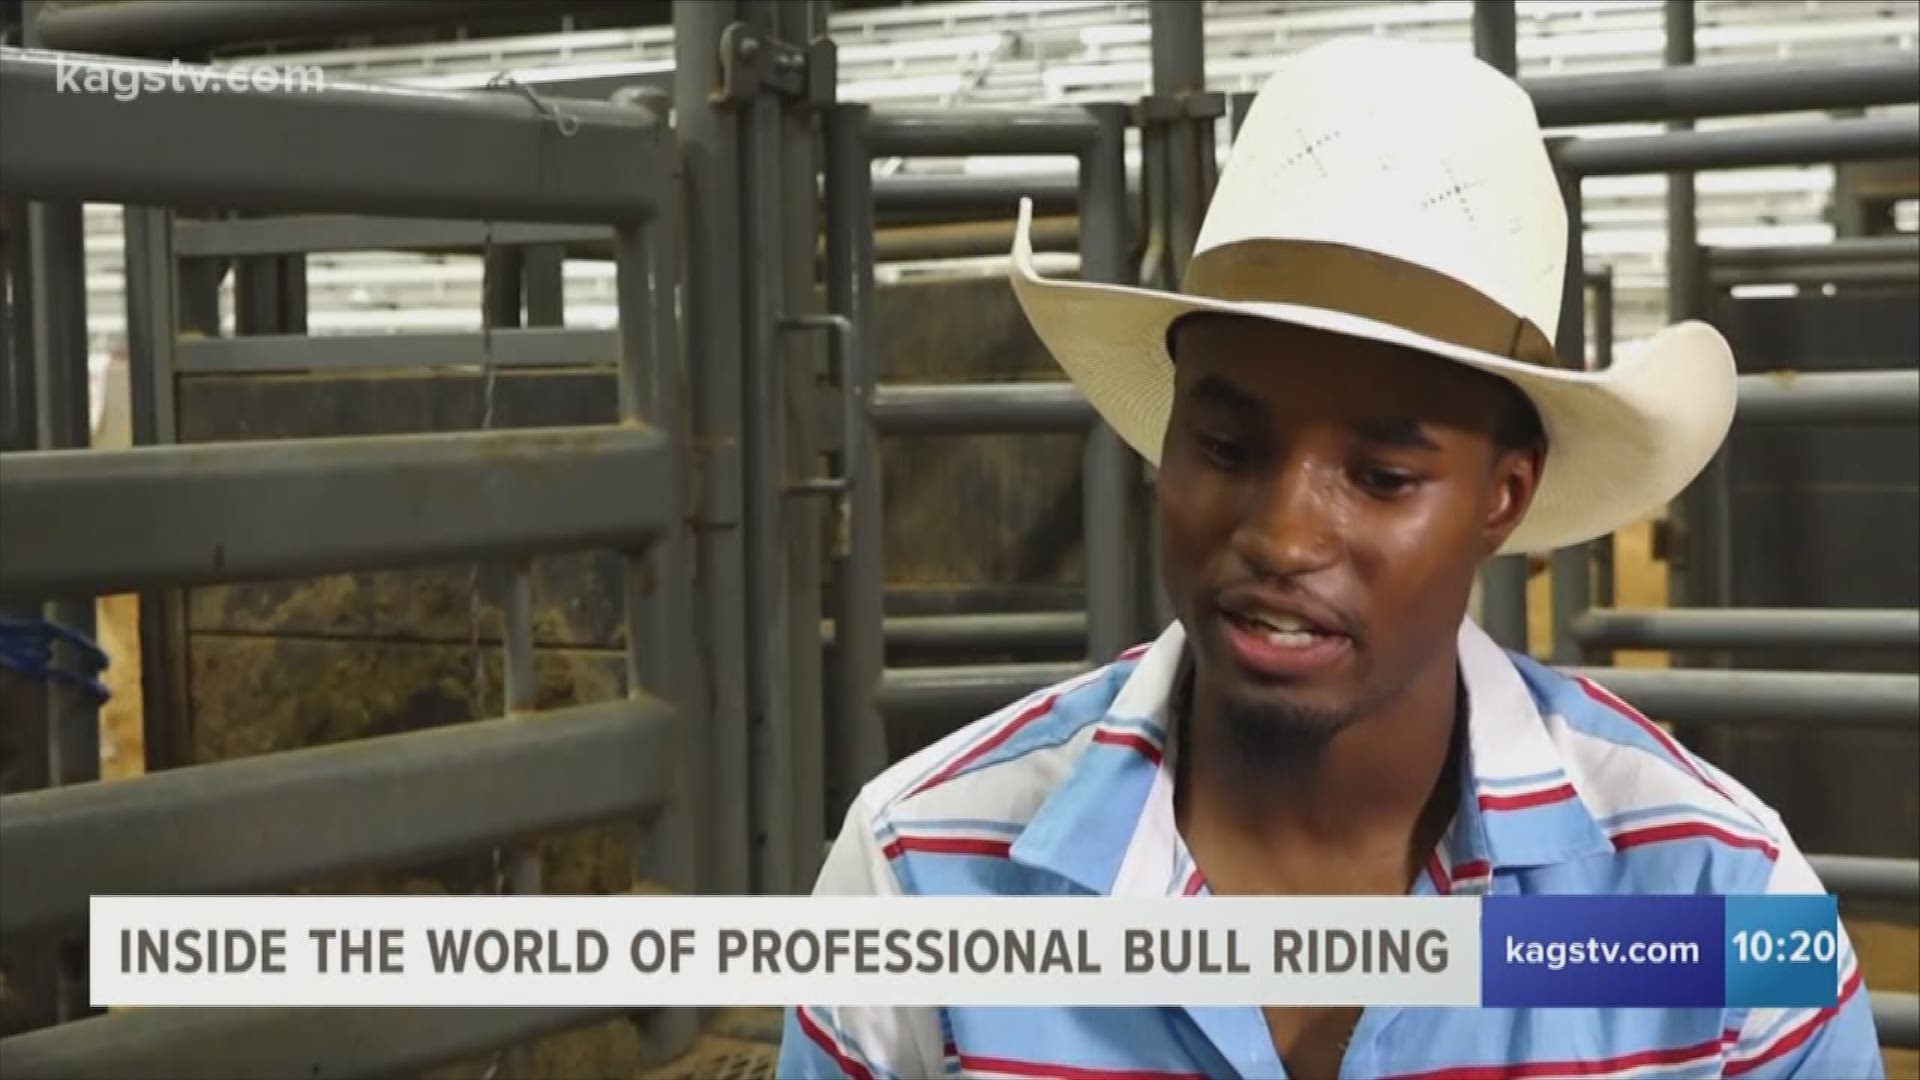 we take an inside look at the most dangerous organized sport in the world with PBR bull rider Ouncie Mitchell